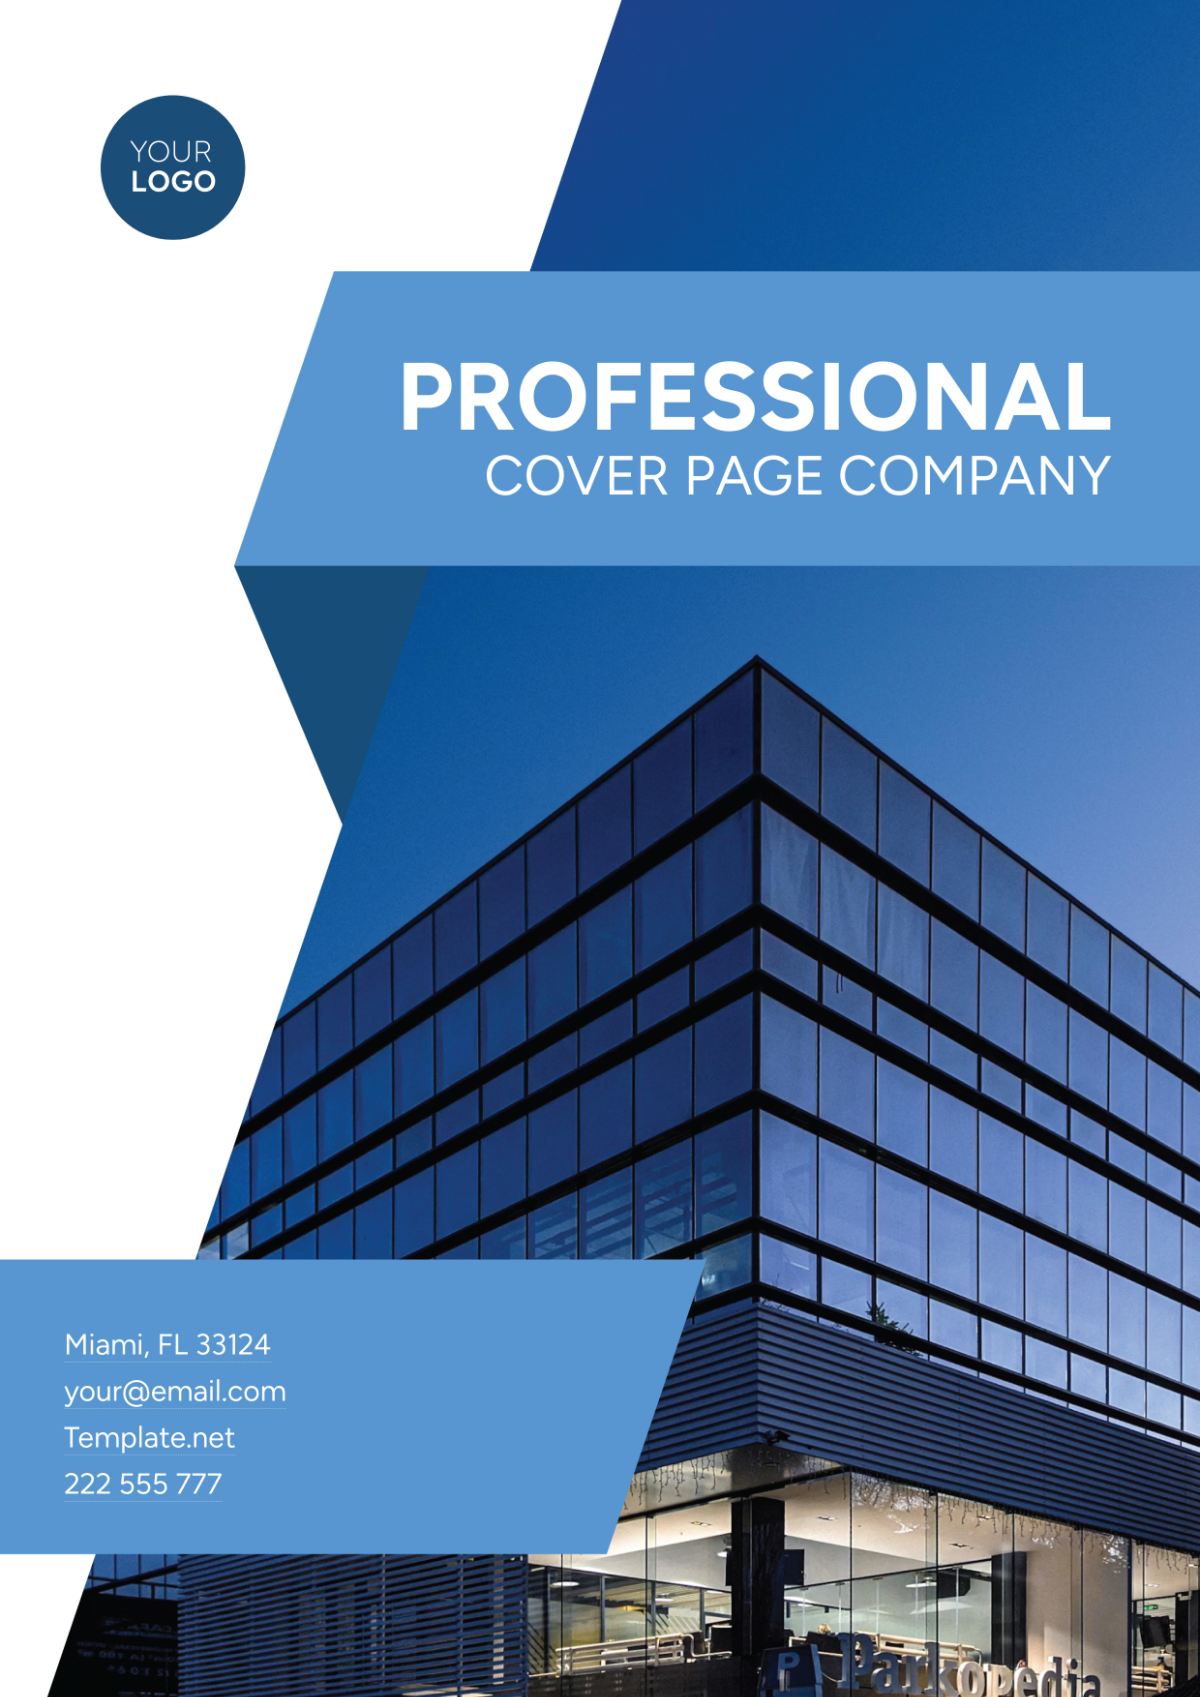 Professional Cover Page Company